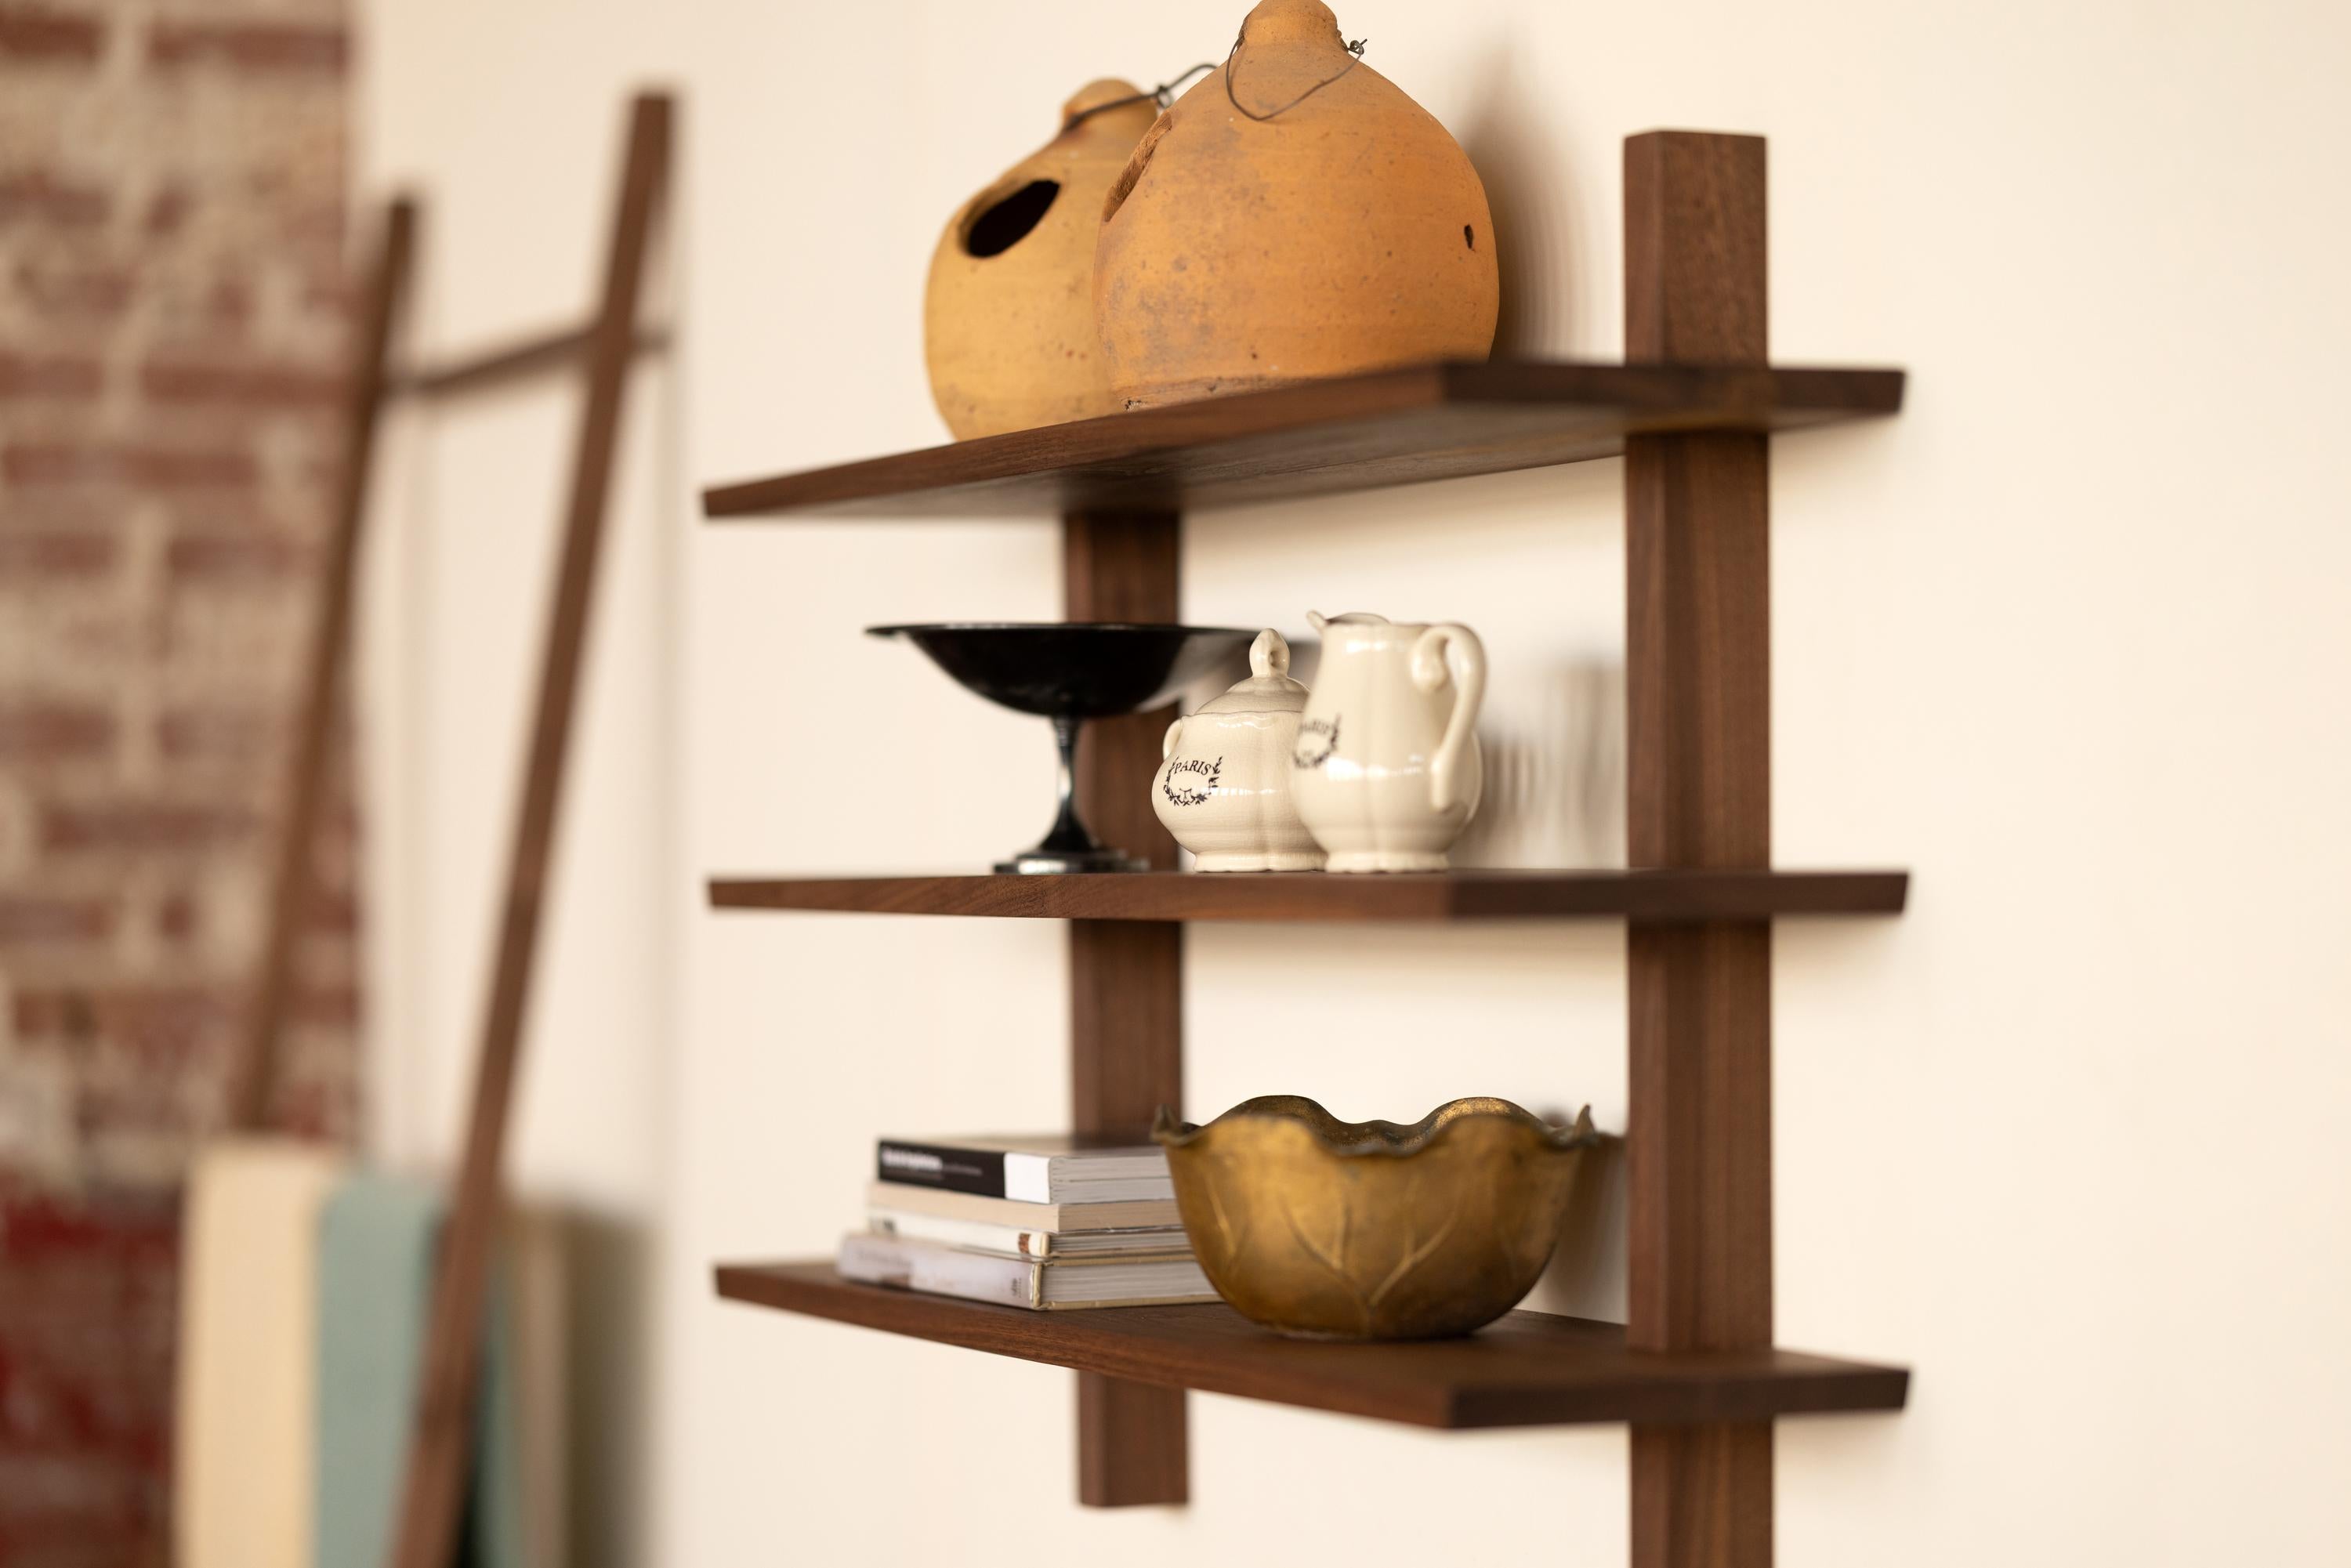 This Floating Shelving Unit offers a new and modern take on Mid-century wall storage. Defined by sturdiness and minimalism, this Still Life floating shelving unit is available in natural walnut or stained oak. 

What is now called a 